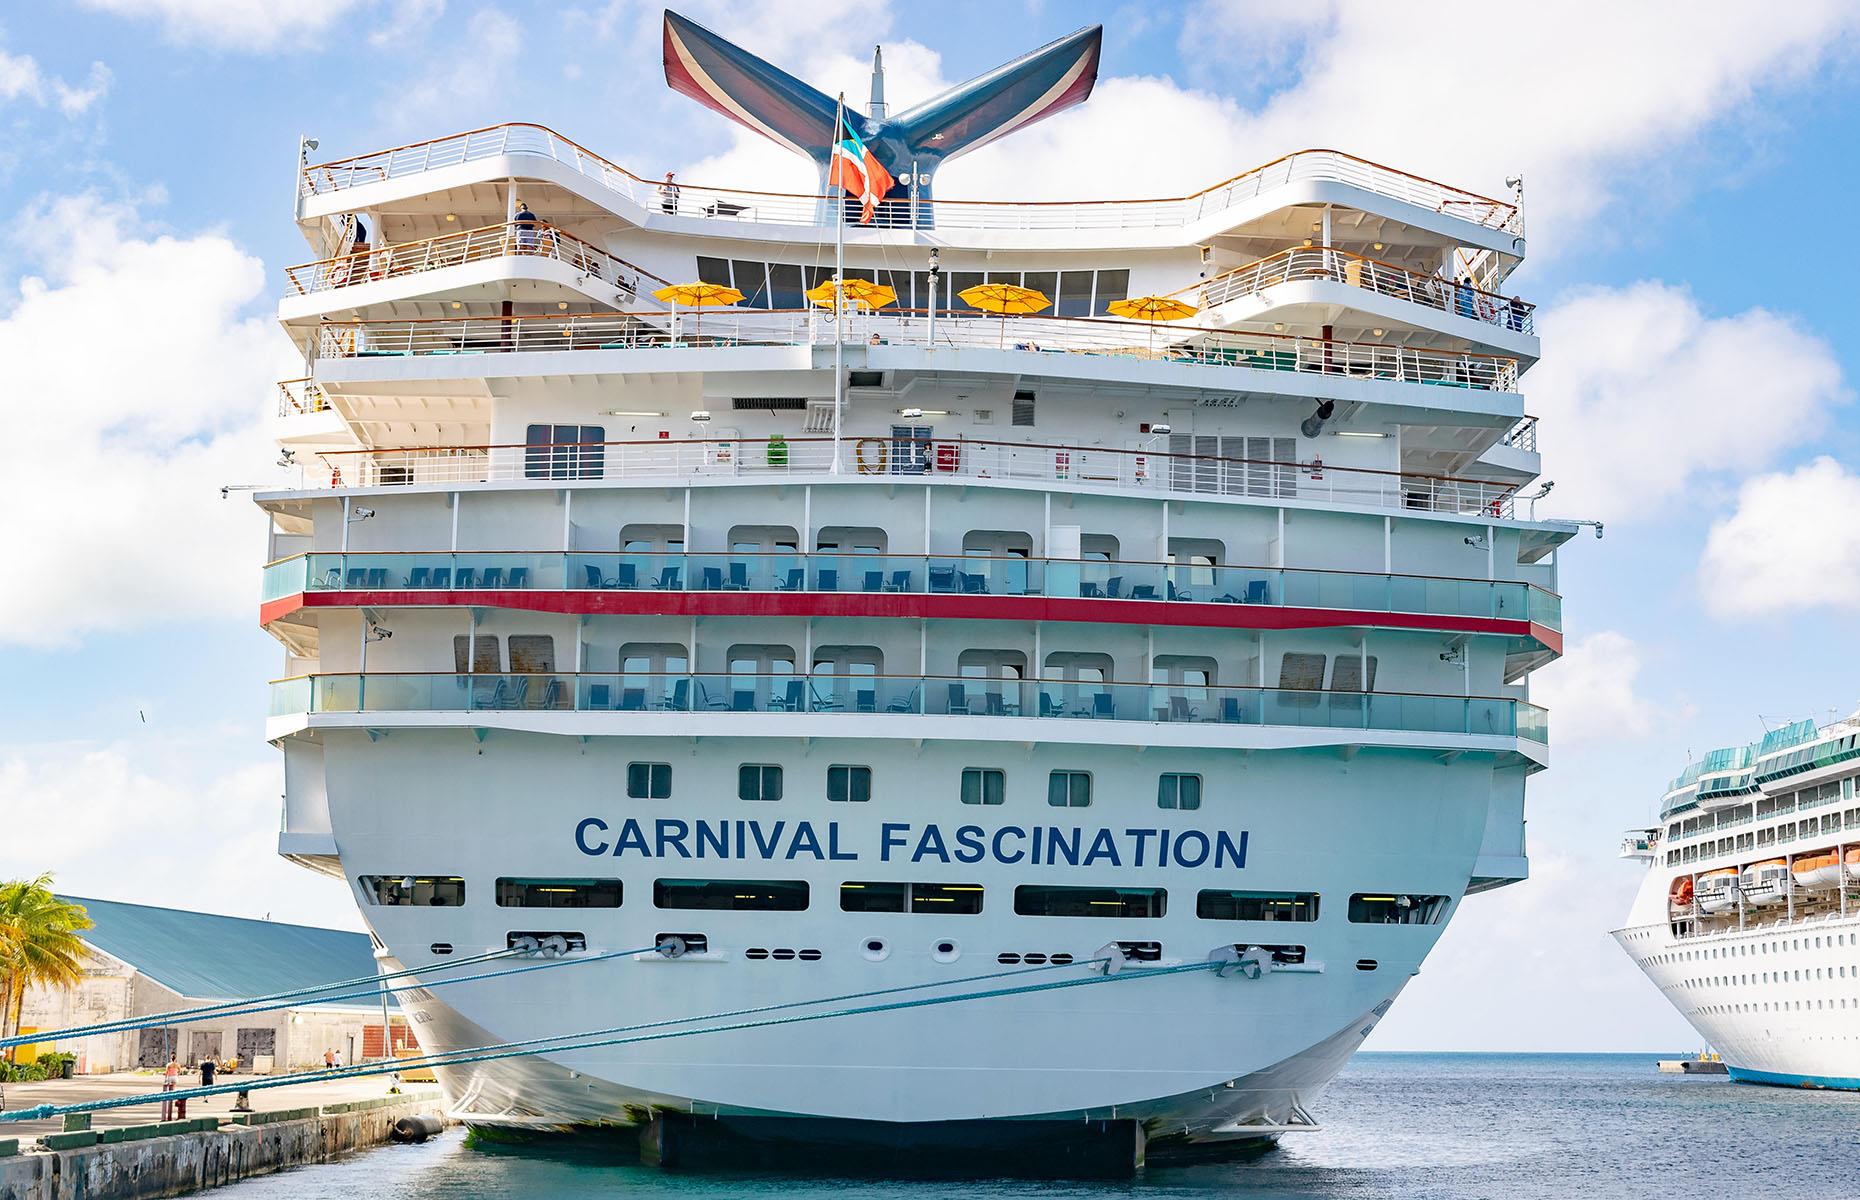 <p>In July 2020, Carnival announced its exit from the fleet and the ship was sold and renamed the Century Harmony. However, despite plans to become a floating hotel, the ship was sold to a Singaporean trading company which sold her off for scrap metal. She arrived at the Gadani ship-breaking yard in Pakistan in February 2022 where workers stripped her down. Only her empty hull remains with just the bow thrusters visible. </p>